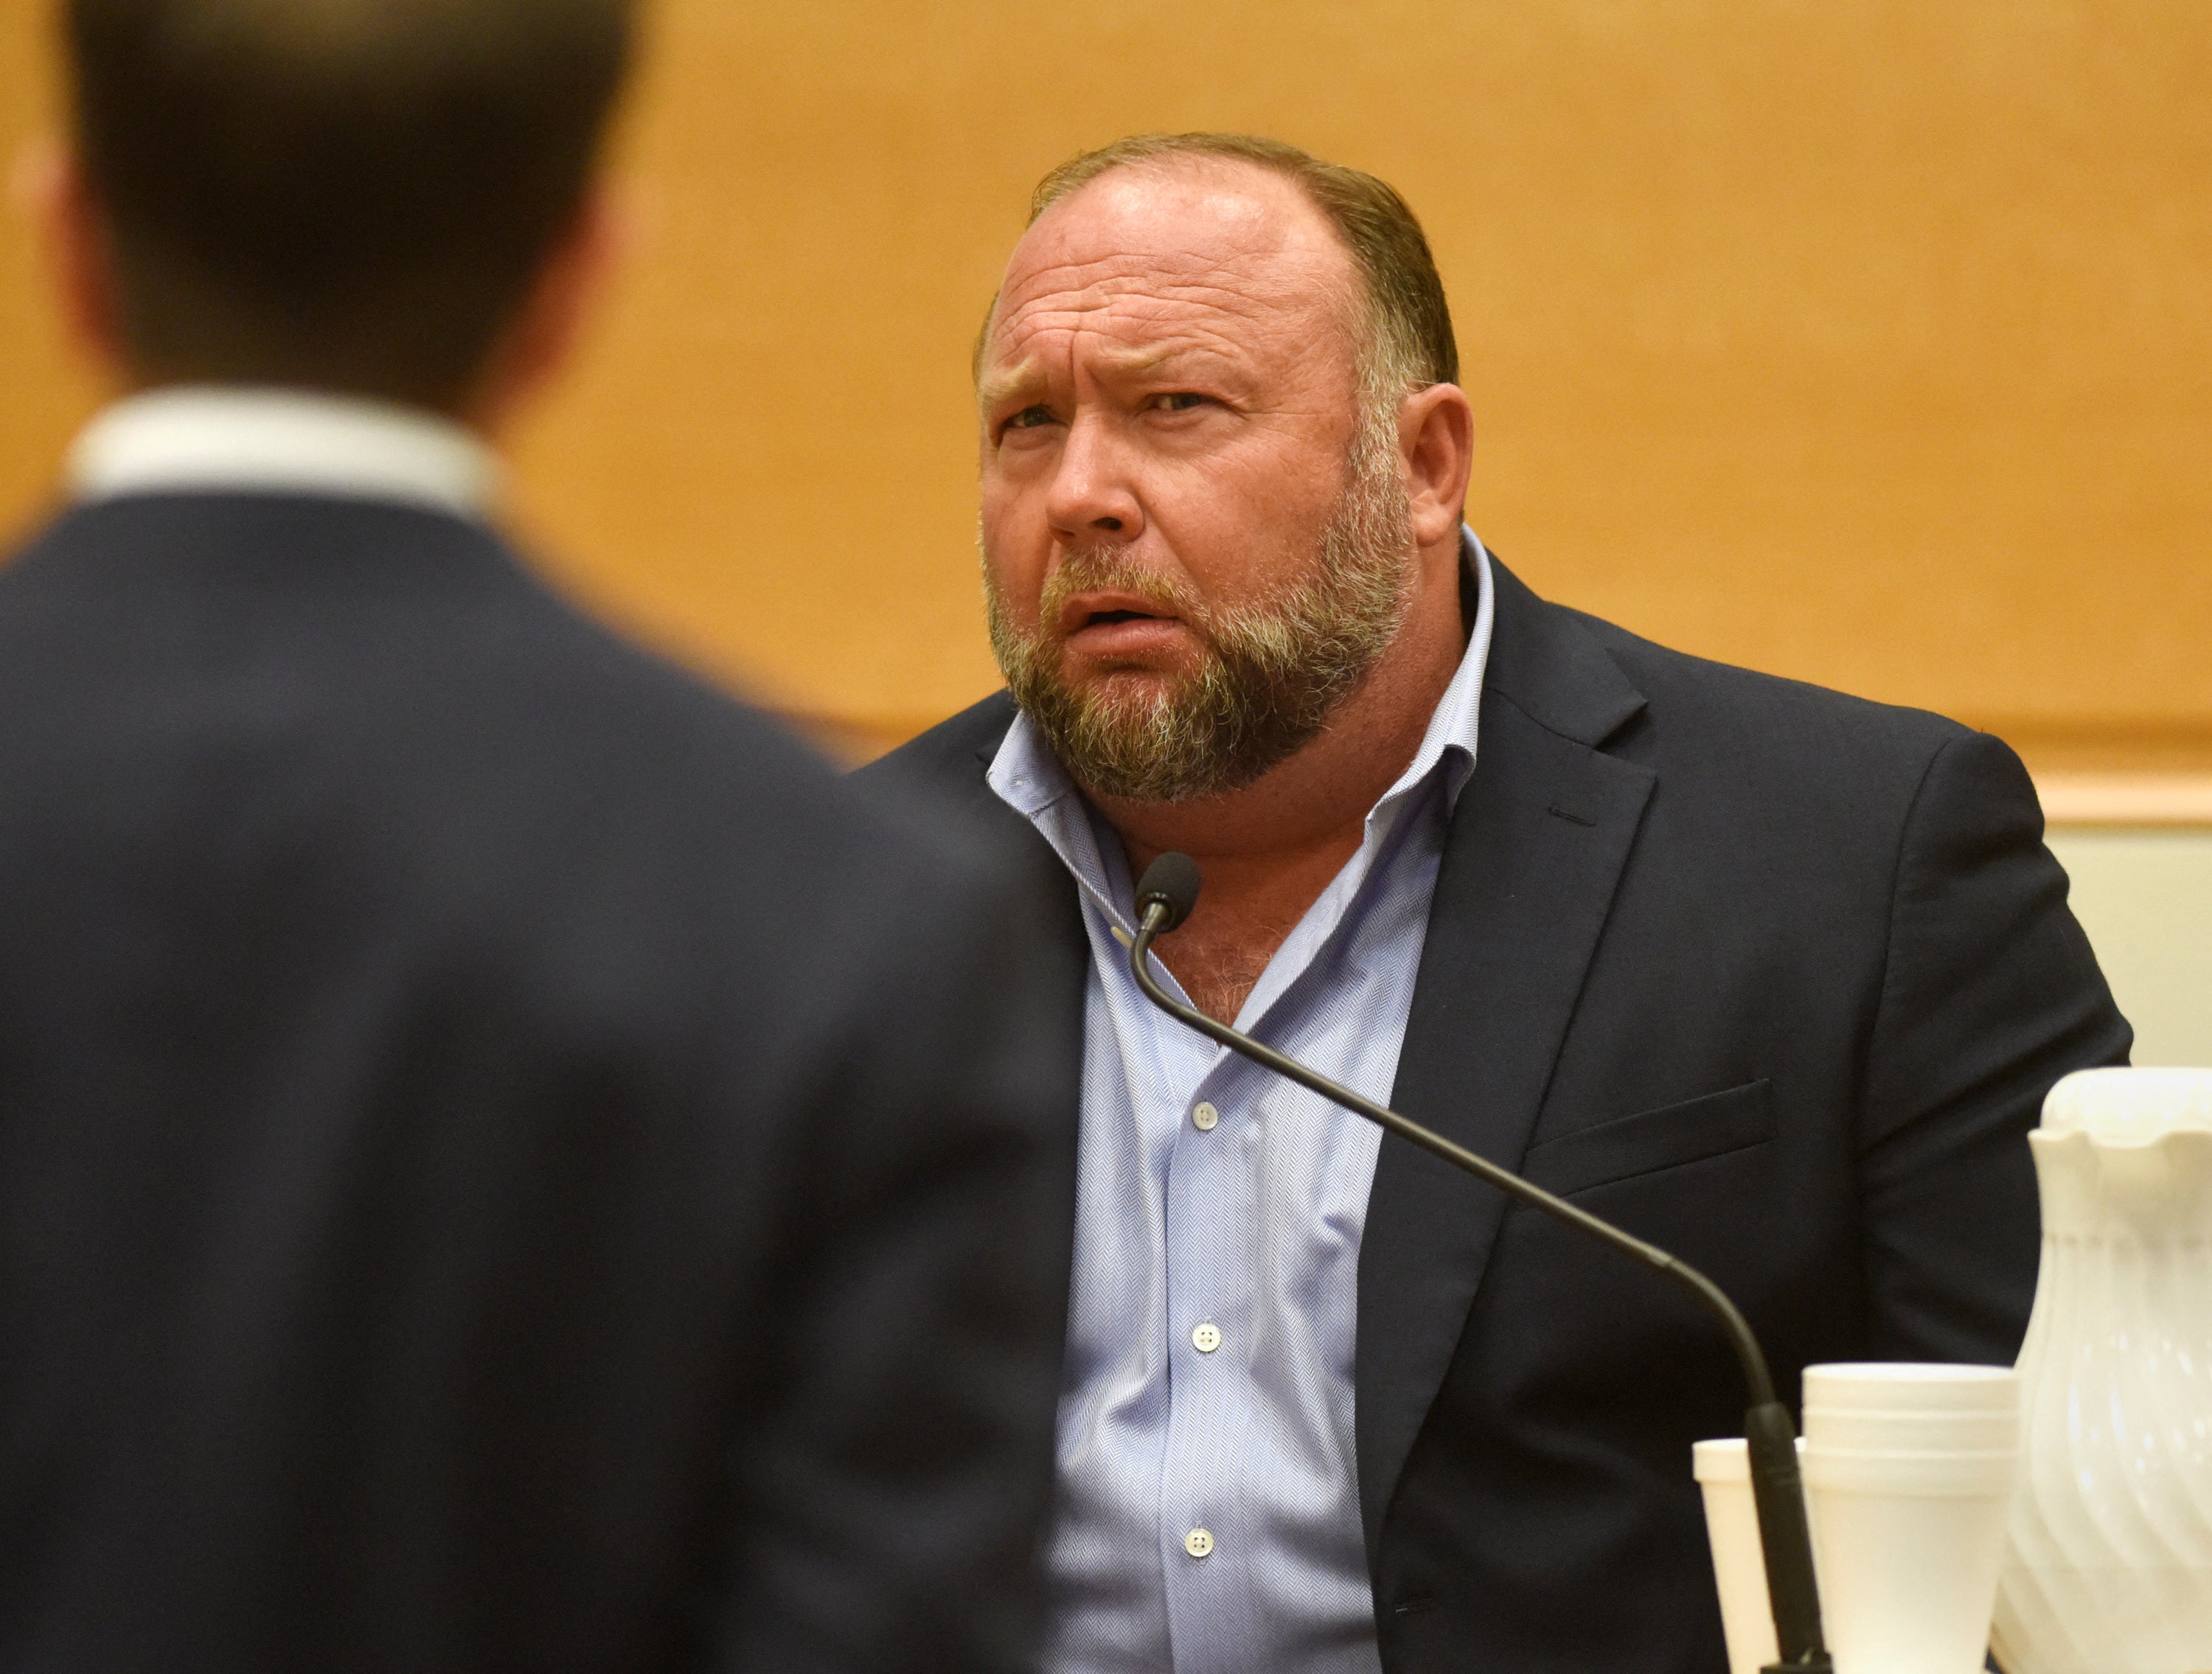 Infowars founder Alex Jones takes the witness stand to testify on 23 September